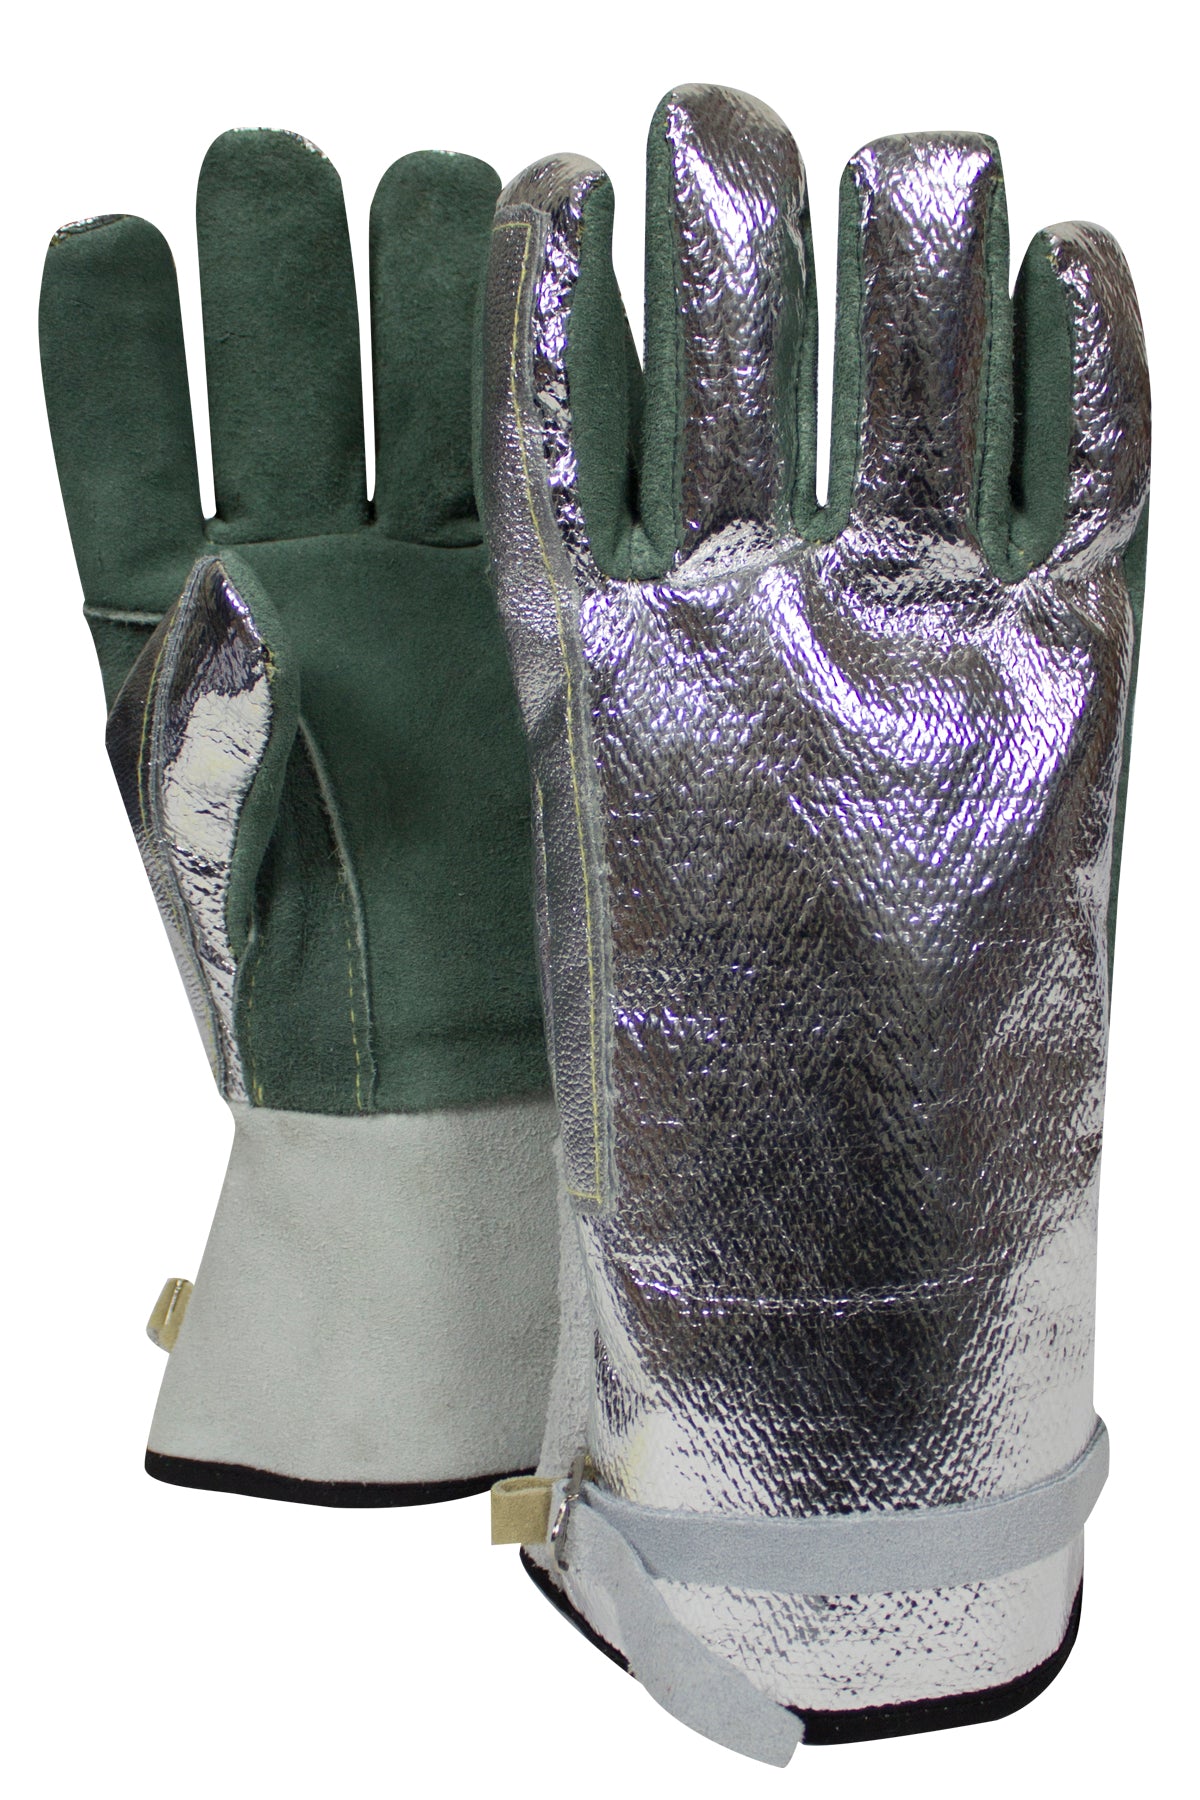 Aluminized High Heat Glove with Leather Palm & Adjustable Strap